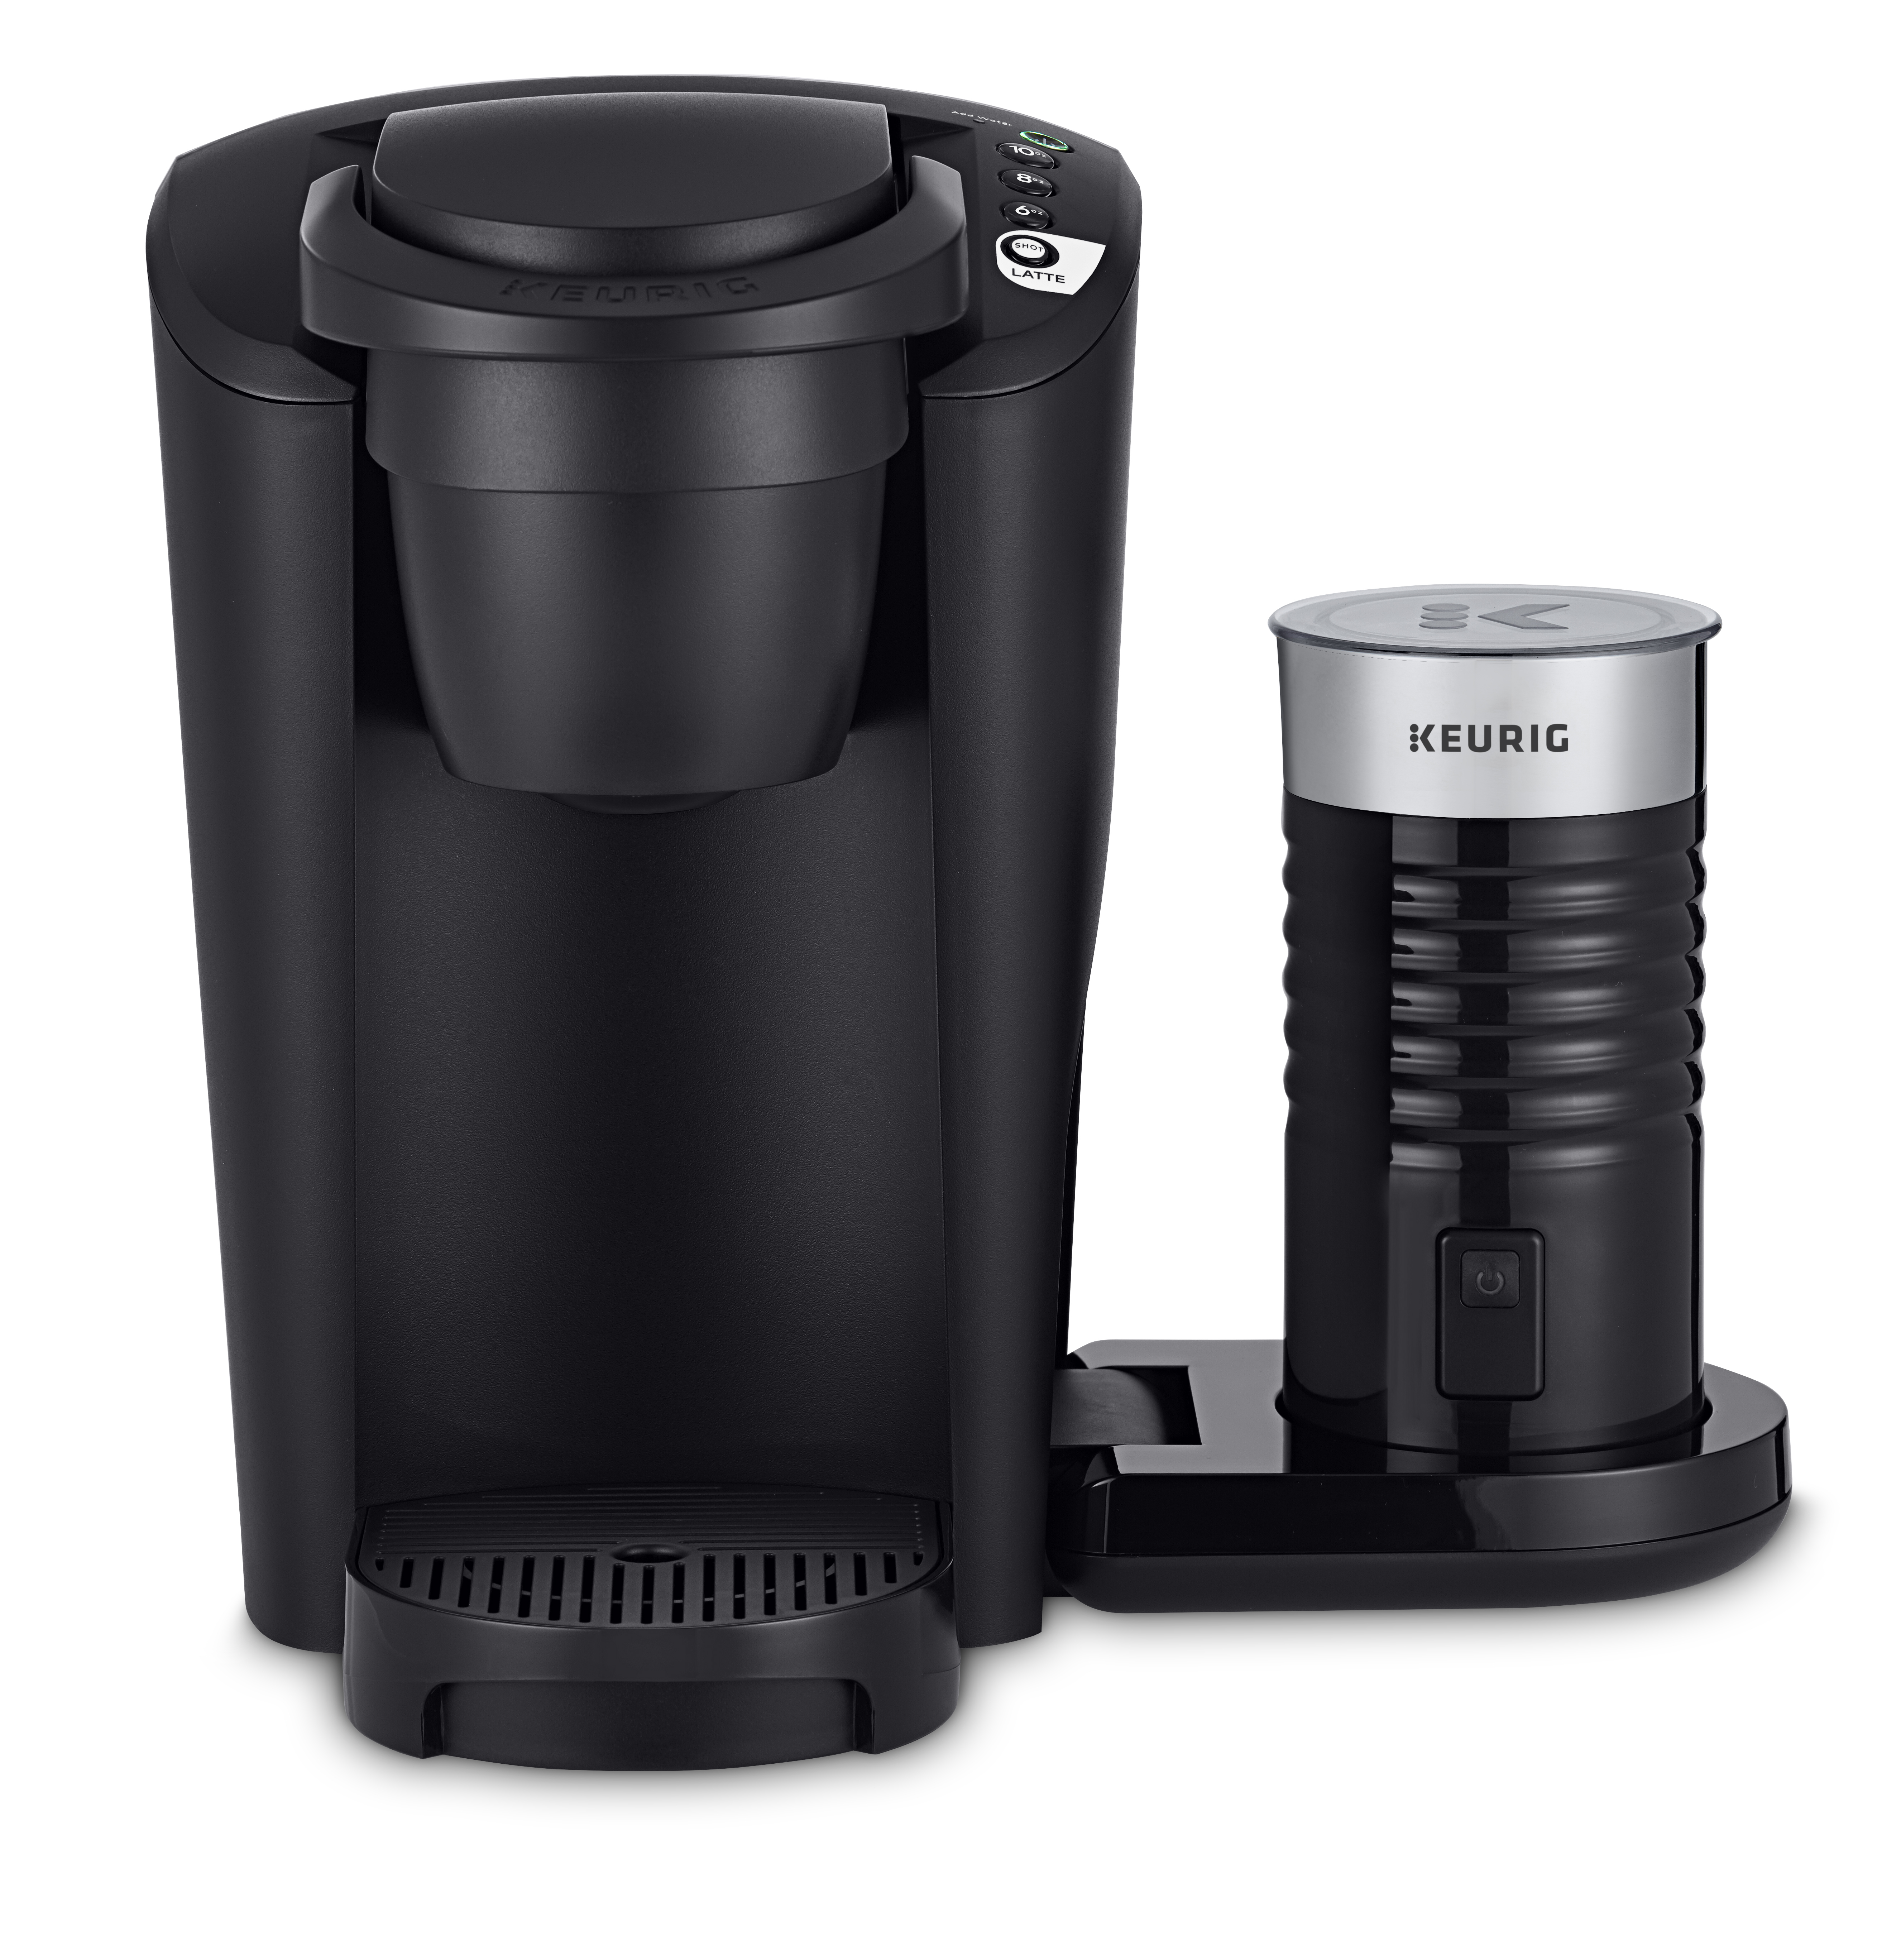 Keurig Brings Coffeehouse Beverages Home with New, All-in-One